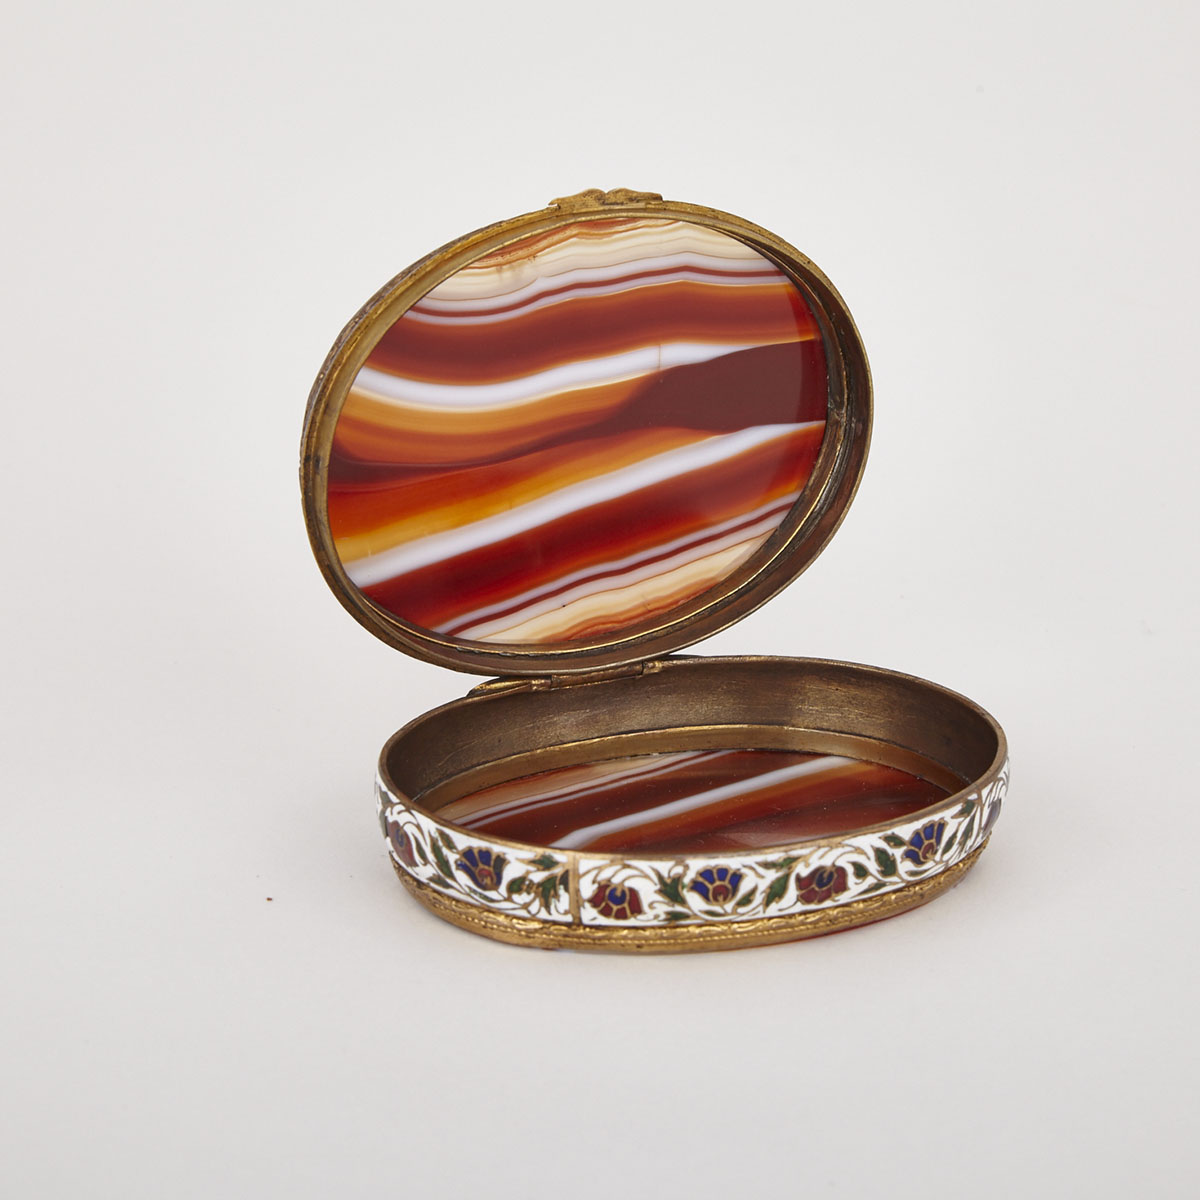 Oval Agate and Champleve Enamelled Box, early 20th century